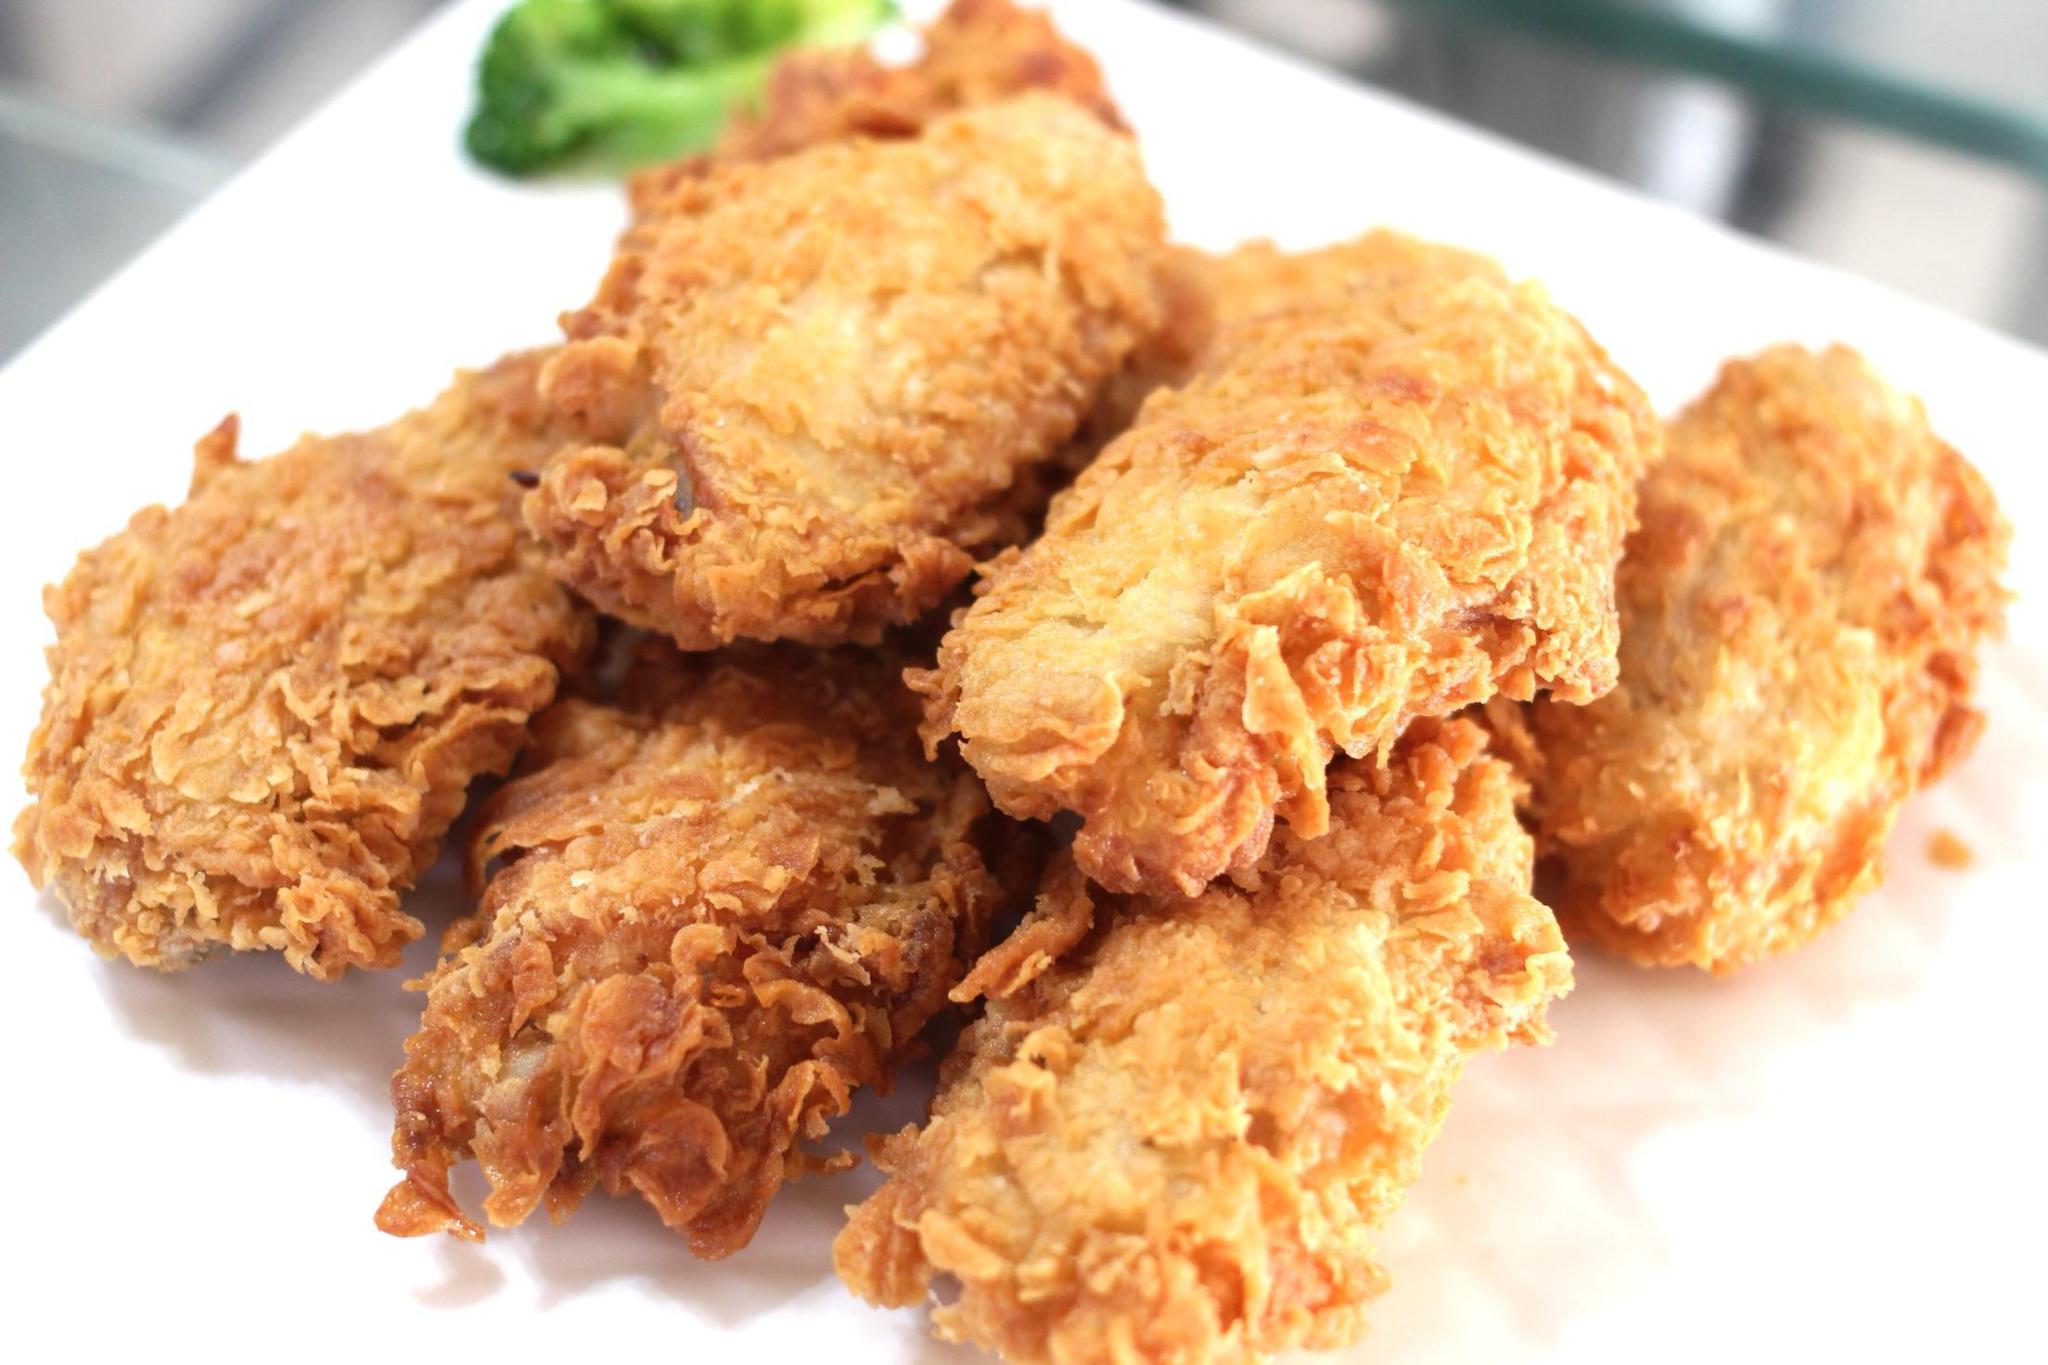 KFC in Naples, opens the king of American fried chicken